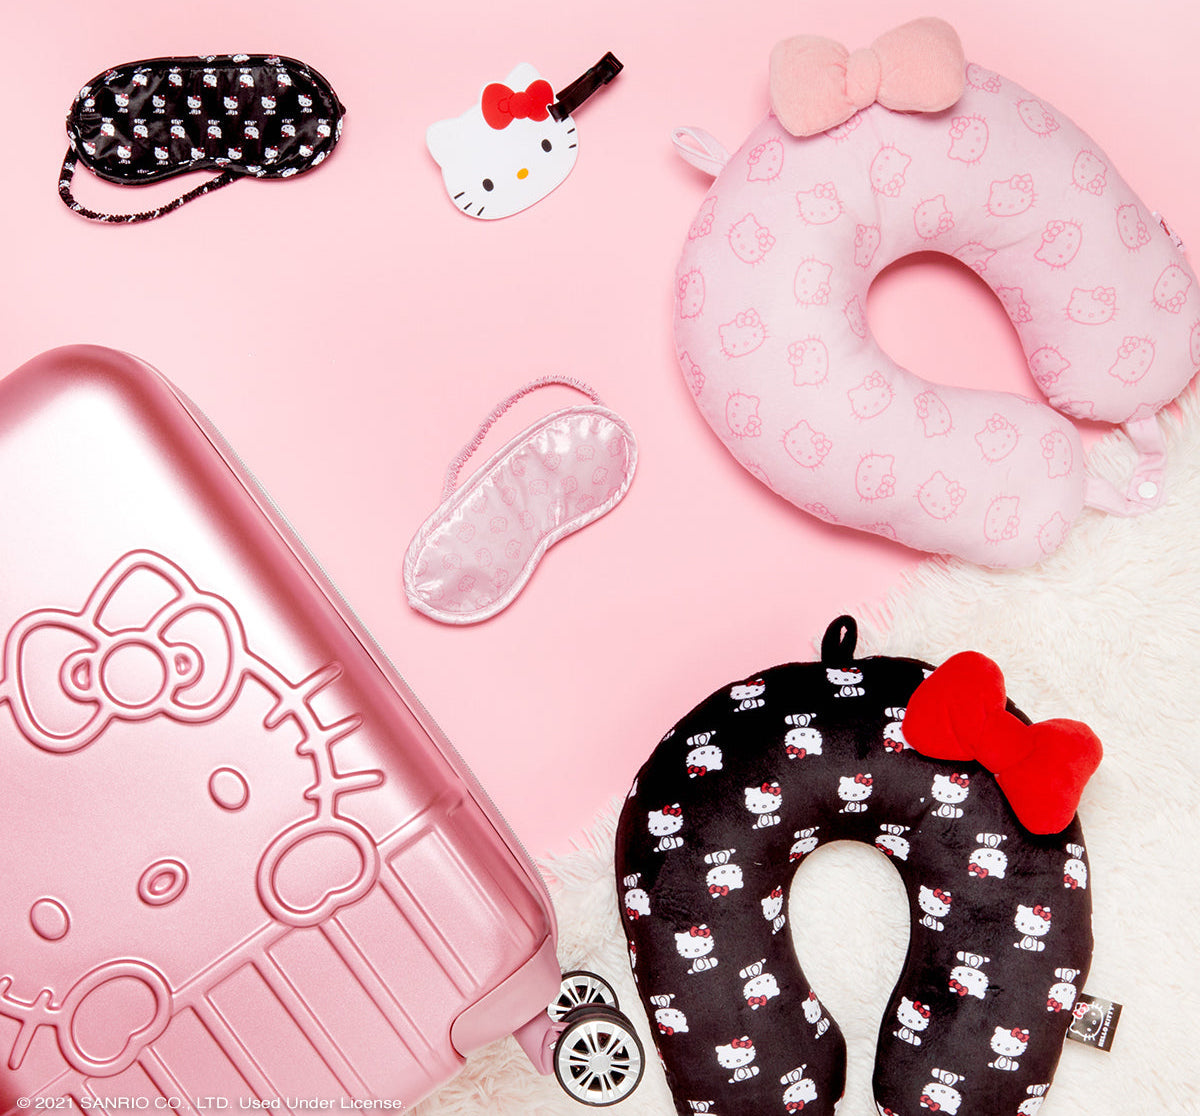 Hello Kitty travel collection 21-inch carry-on suitcase eye mask travel neck pillow and luggage tag